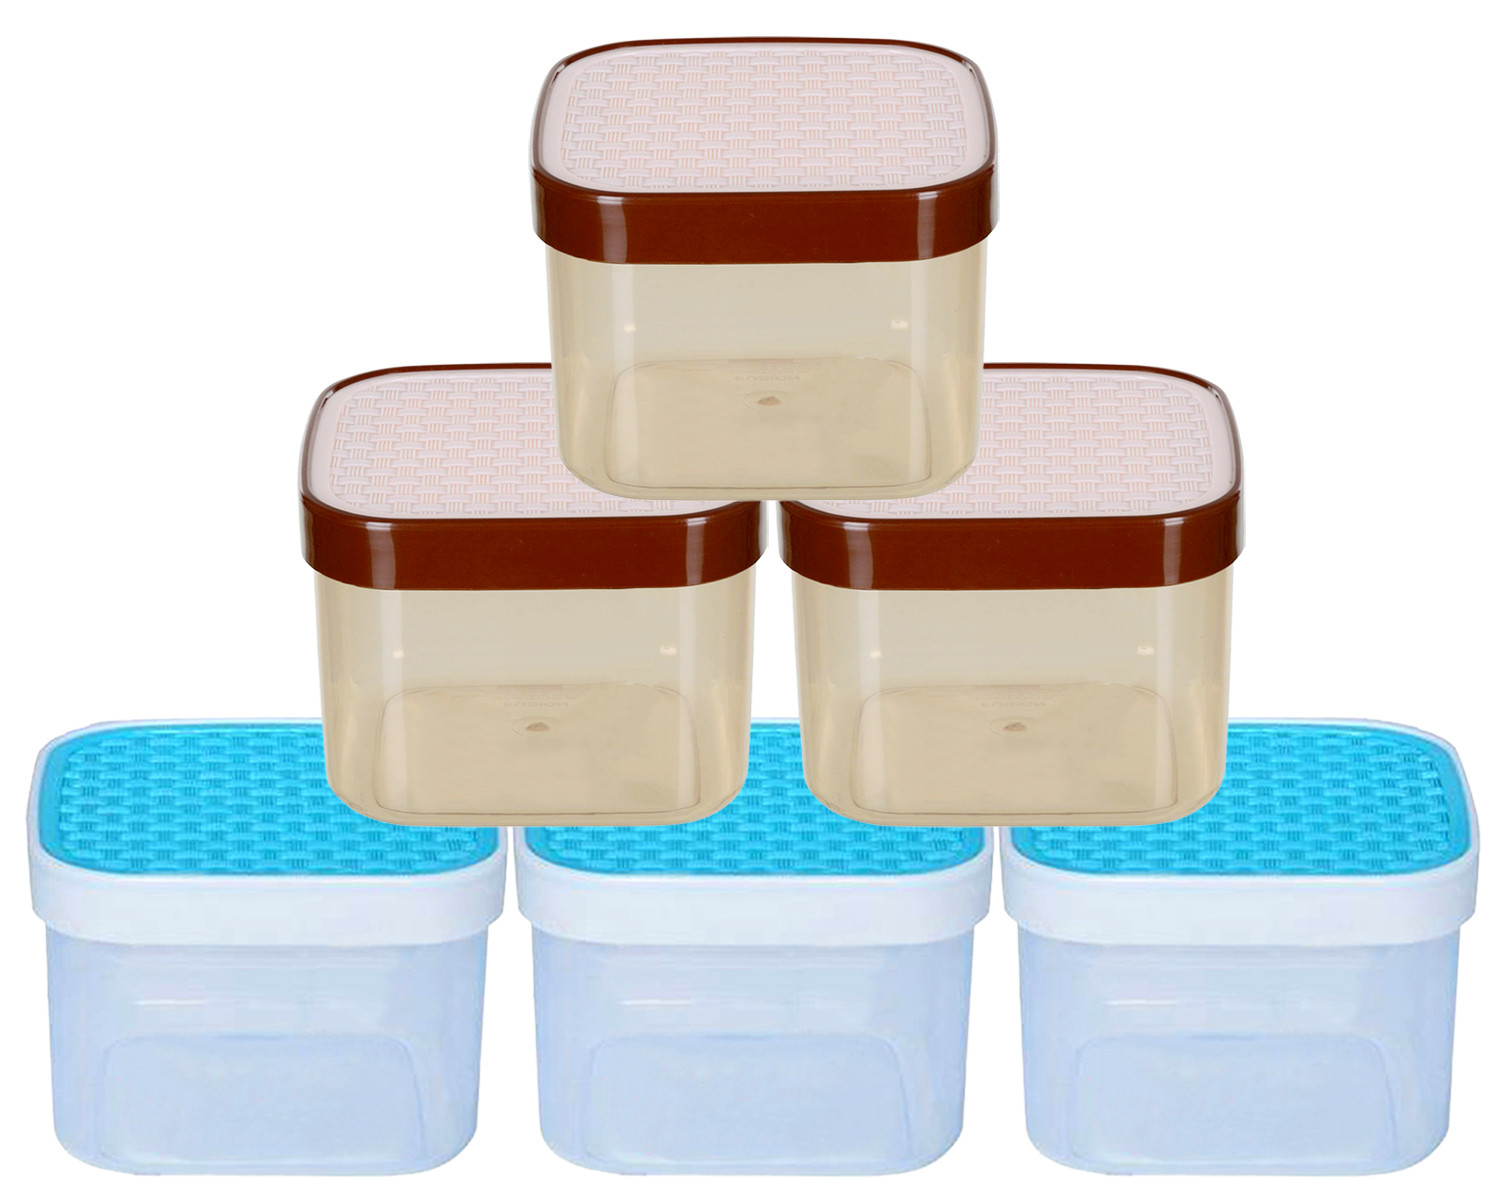 Kuber Industries Check Deisgn Lid  Multi Purpose Plastic Container,1200ml, Set of 6 (White & Blue)